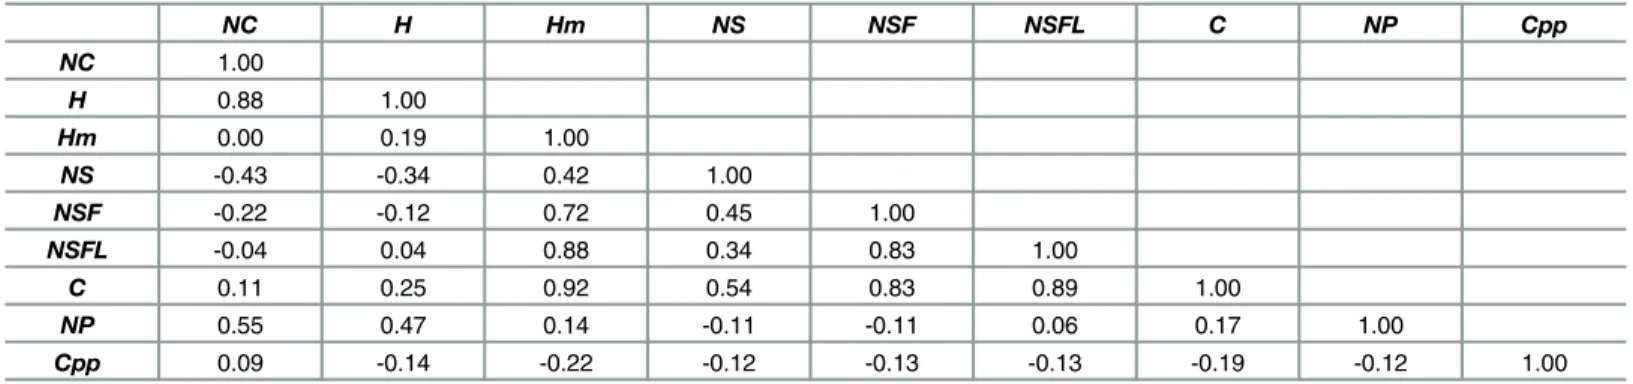 Table 1. Correlations between various citation indicators and other metrics across all 84,116 scientists.